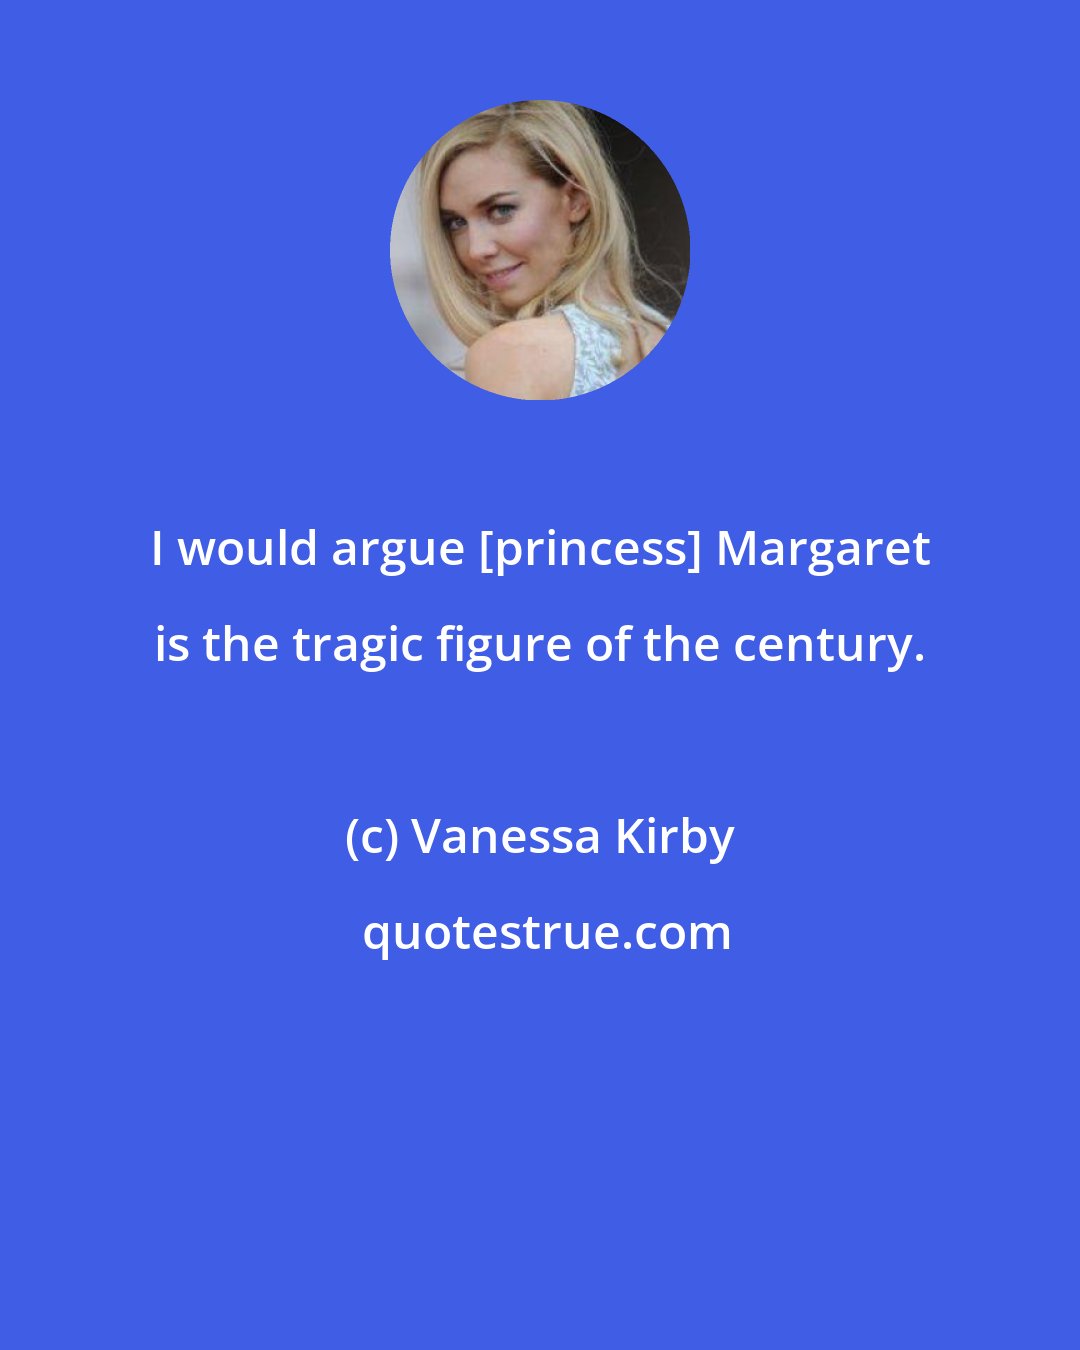 Vanessa Kirby: I would argue [princess] Margaret is the tragic figure of the century.